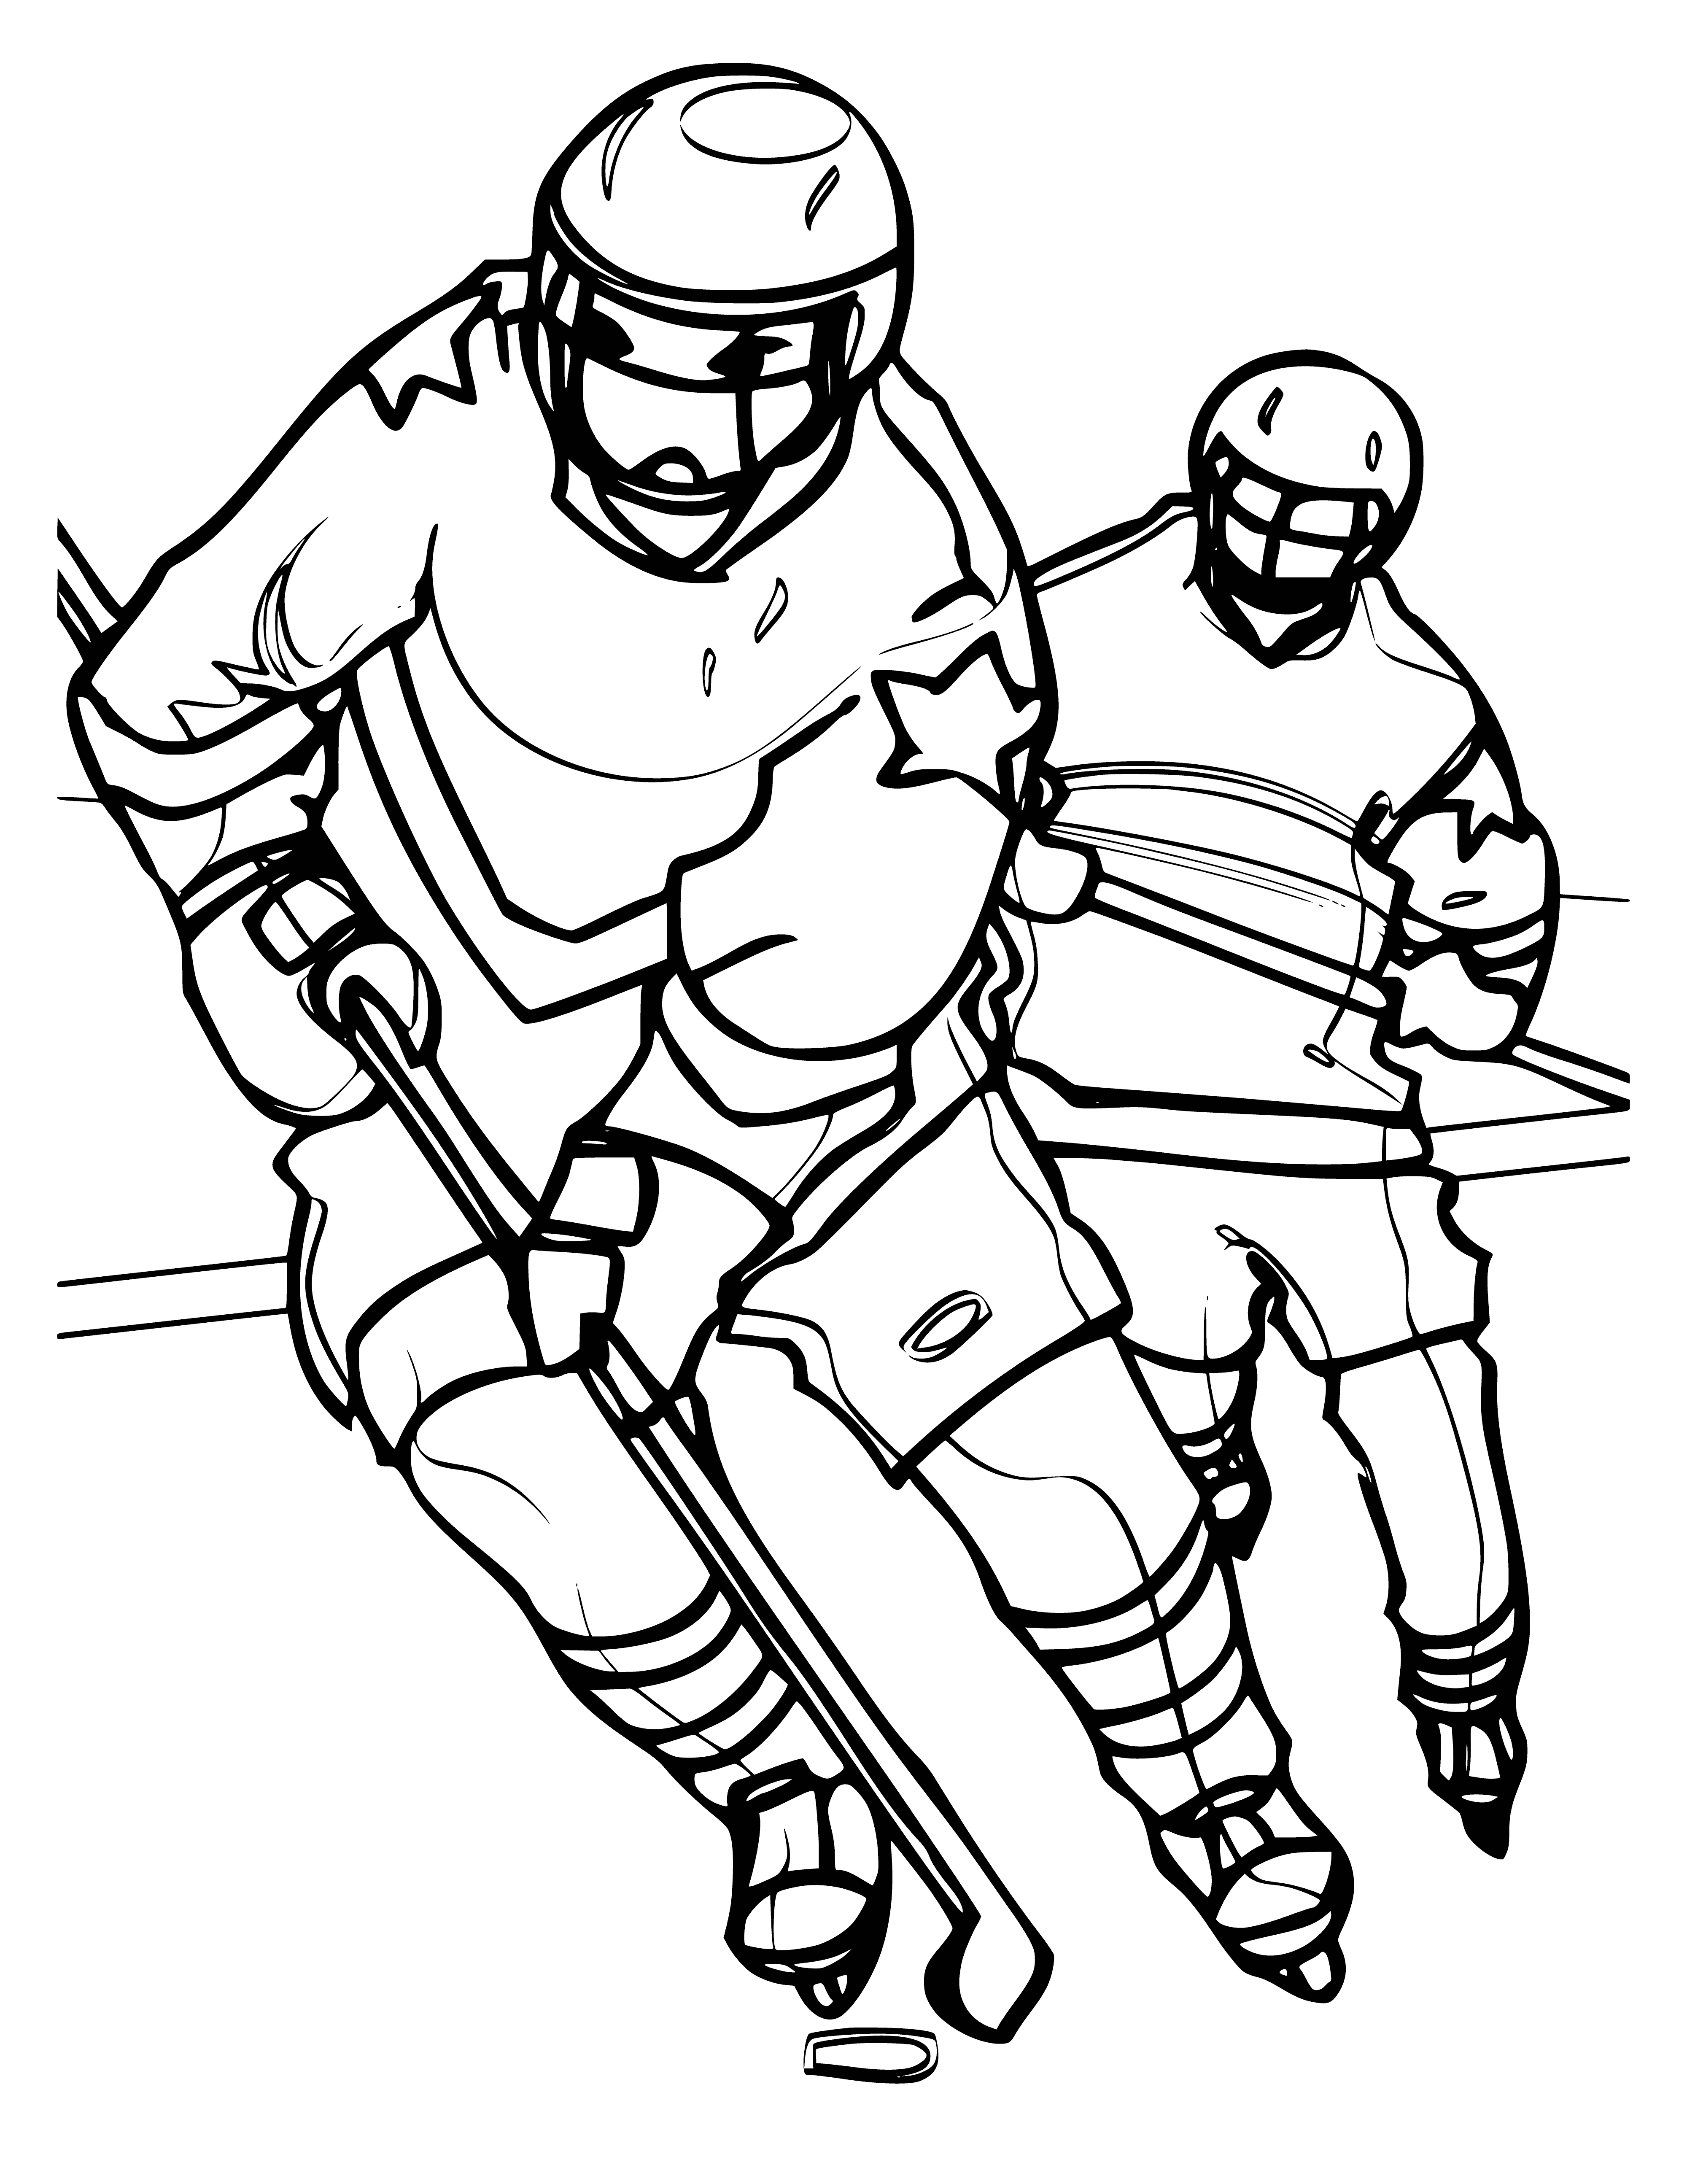 coloring page: Two hockey players skate on ice with puck and sticks, in skates, helmets, and gloves.